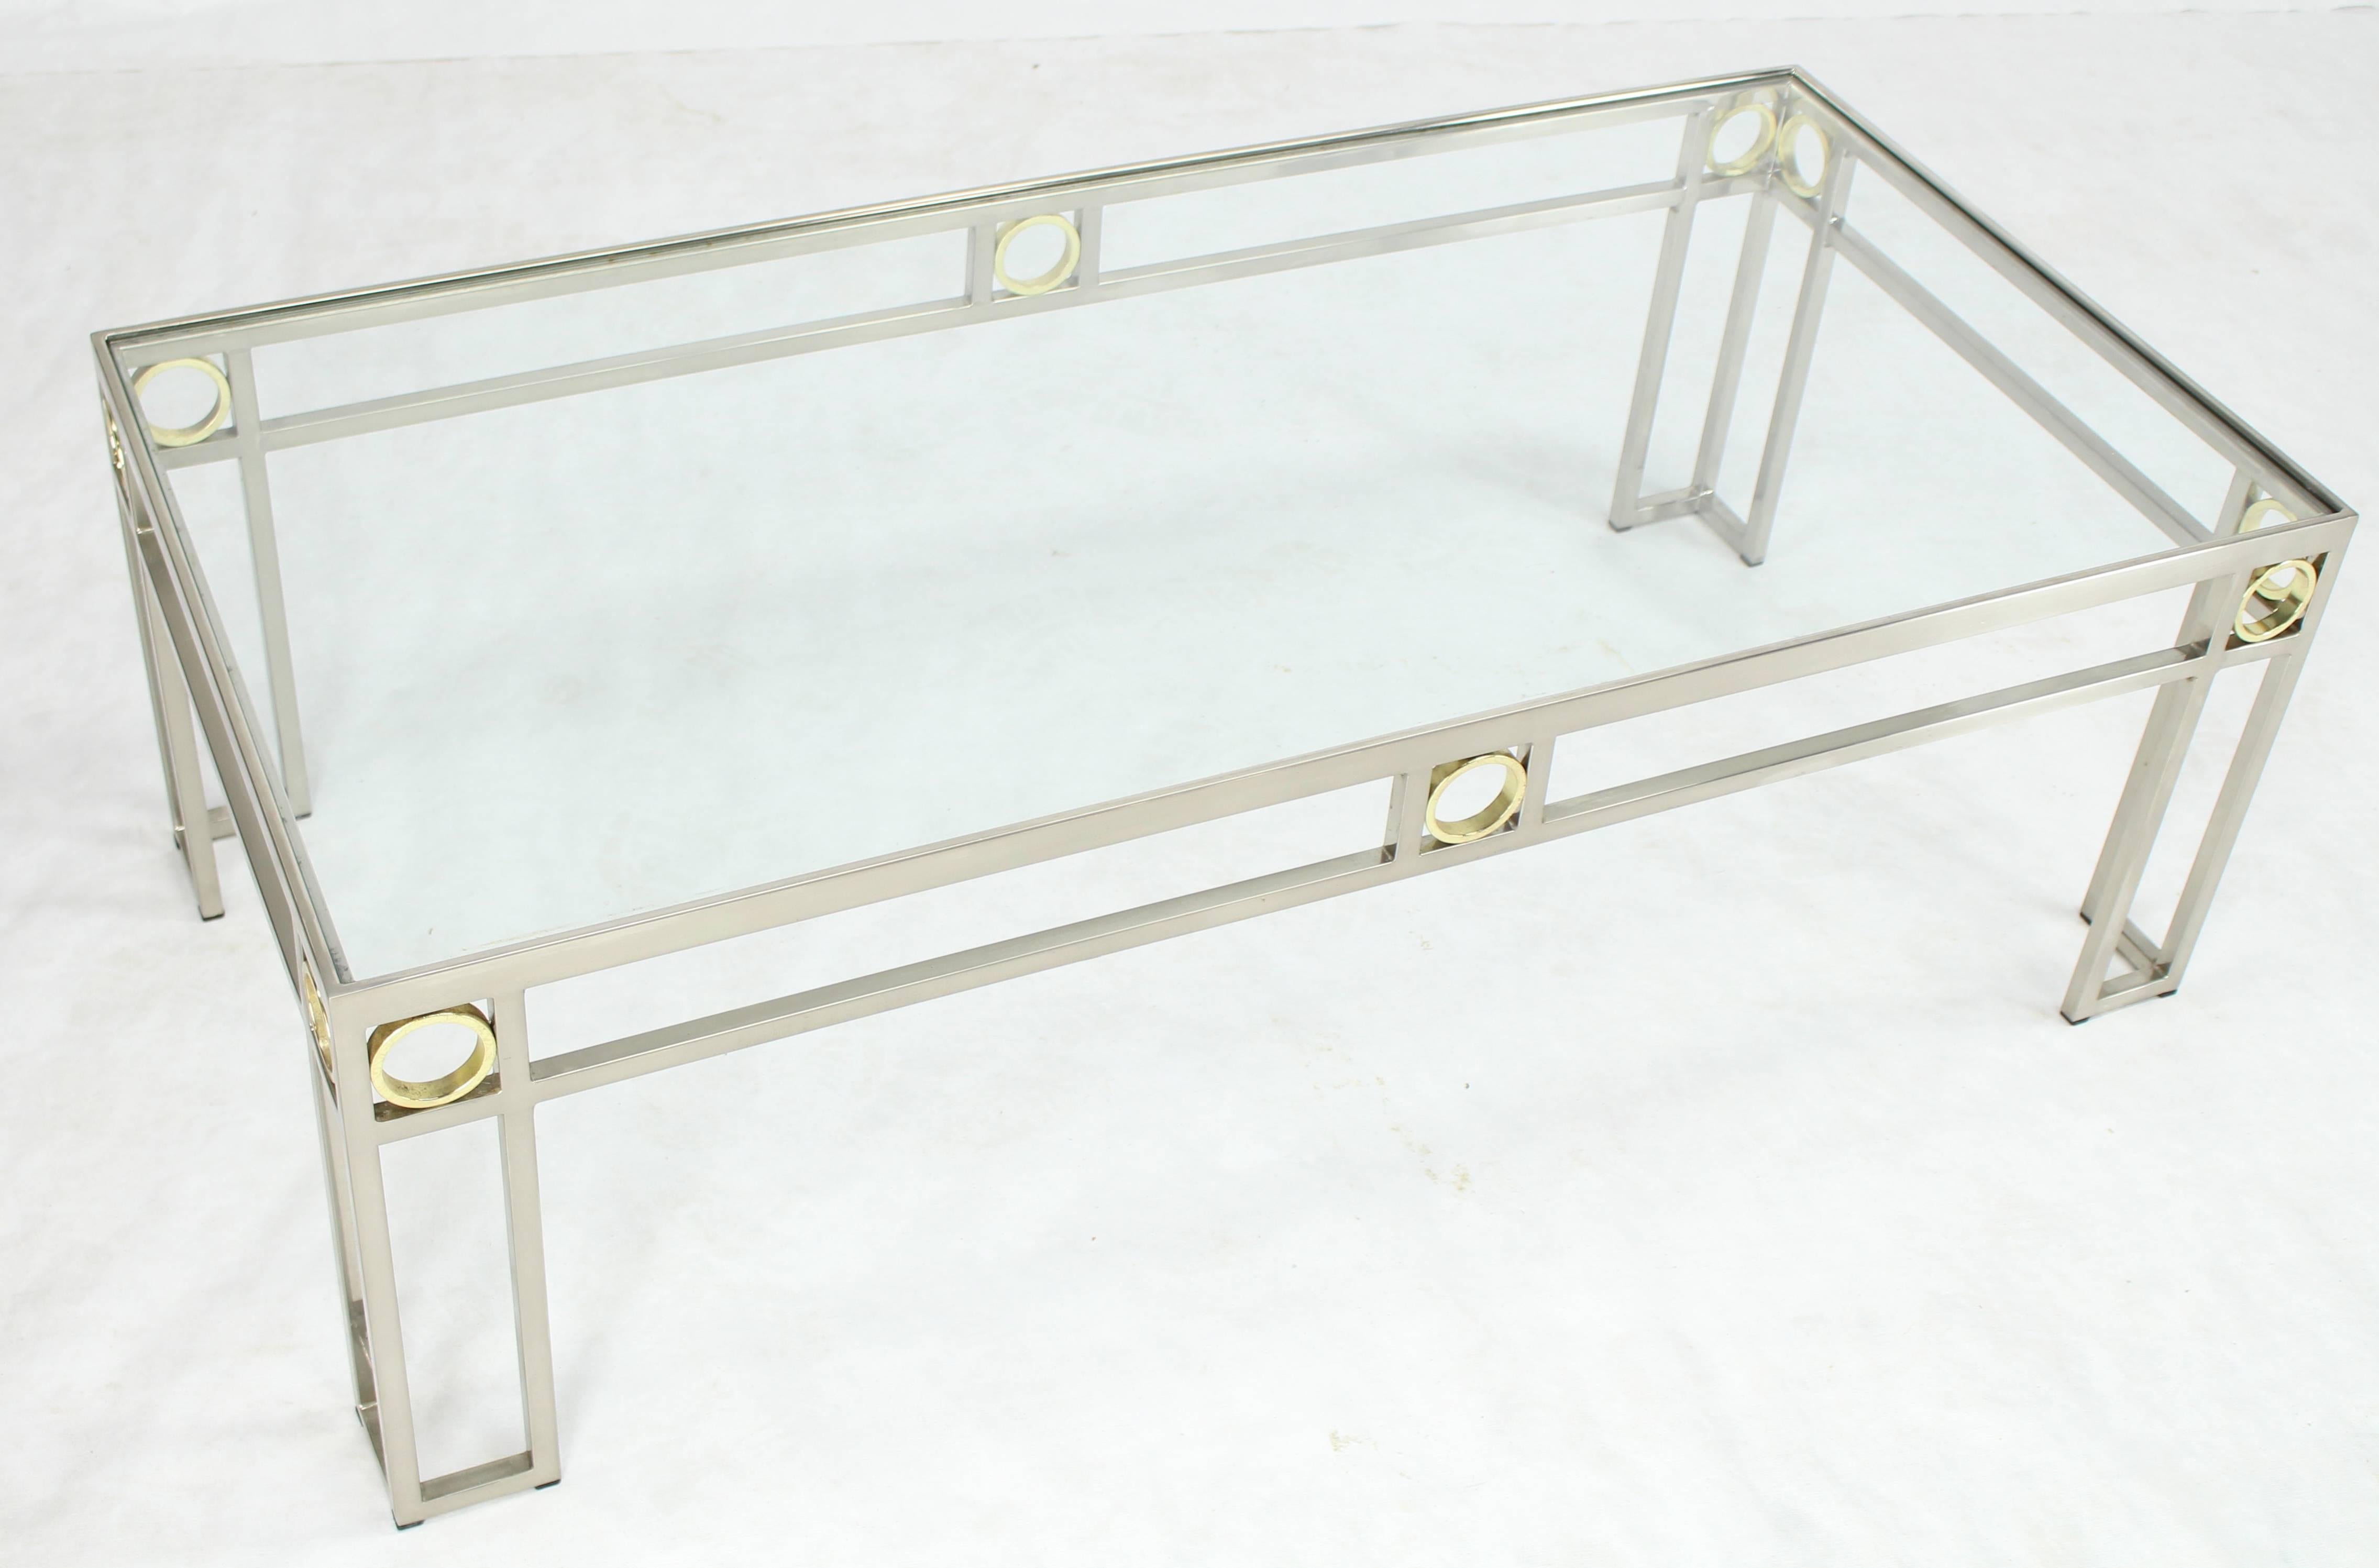 Brass Chrome Glass Rectangular Coffee Table In Excellent Condition For Sale In Rockaway, NJ